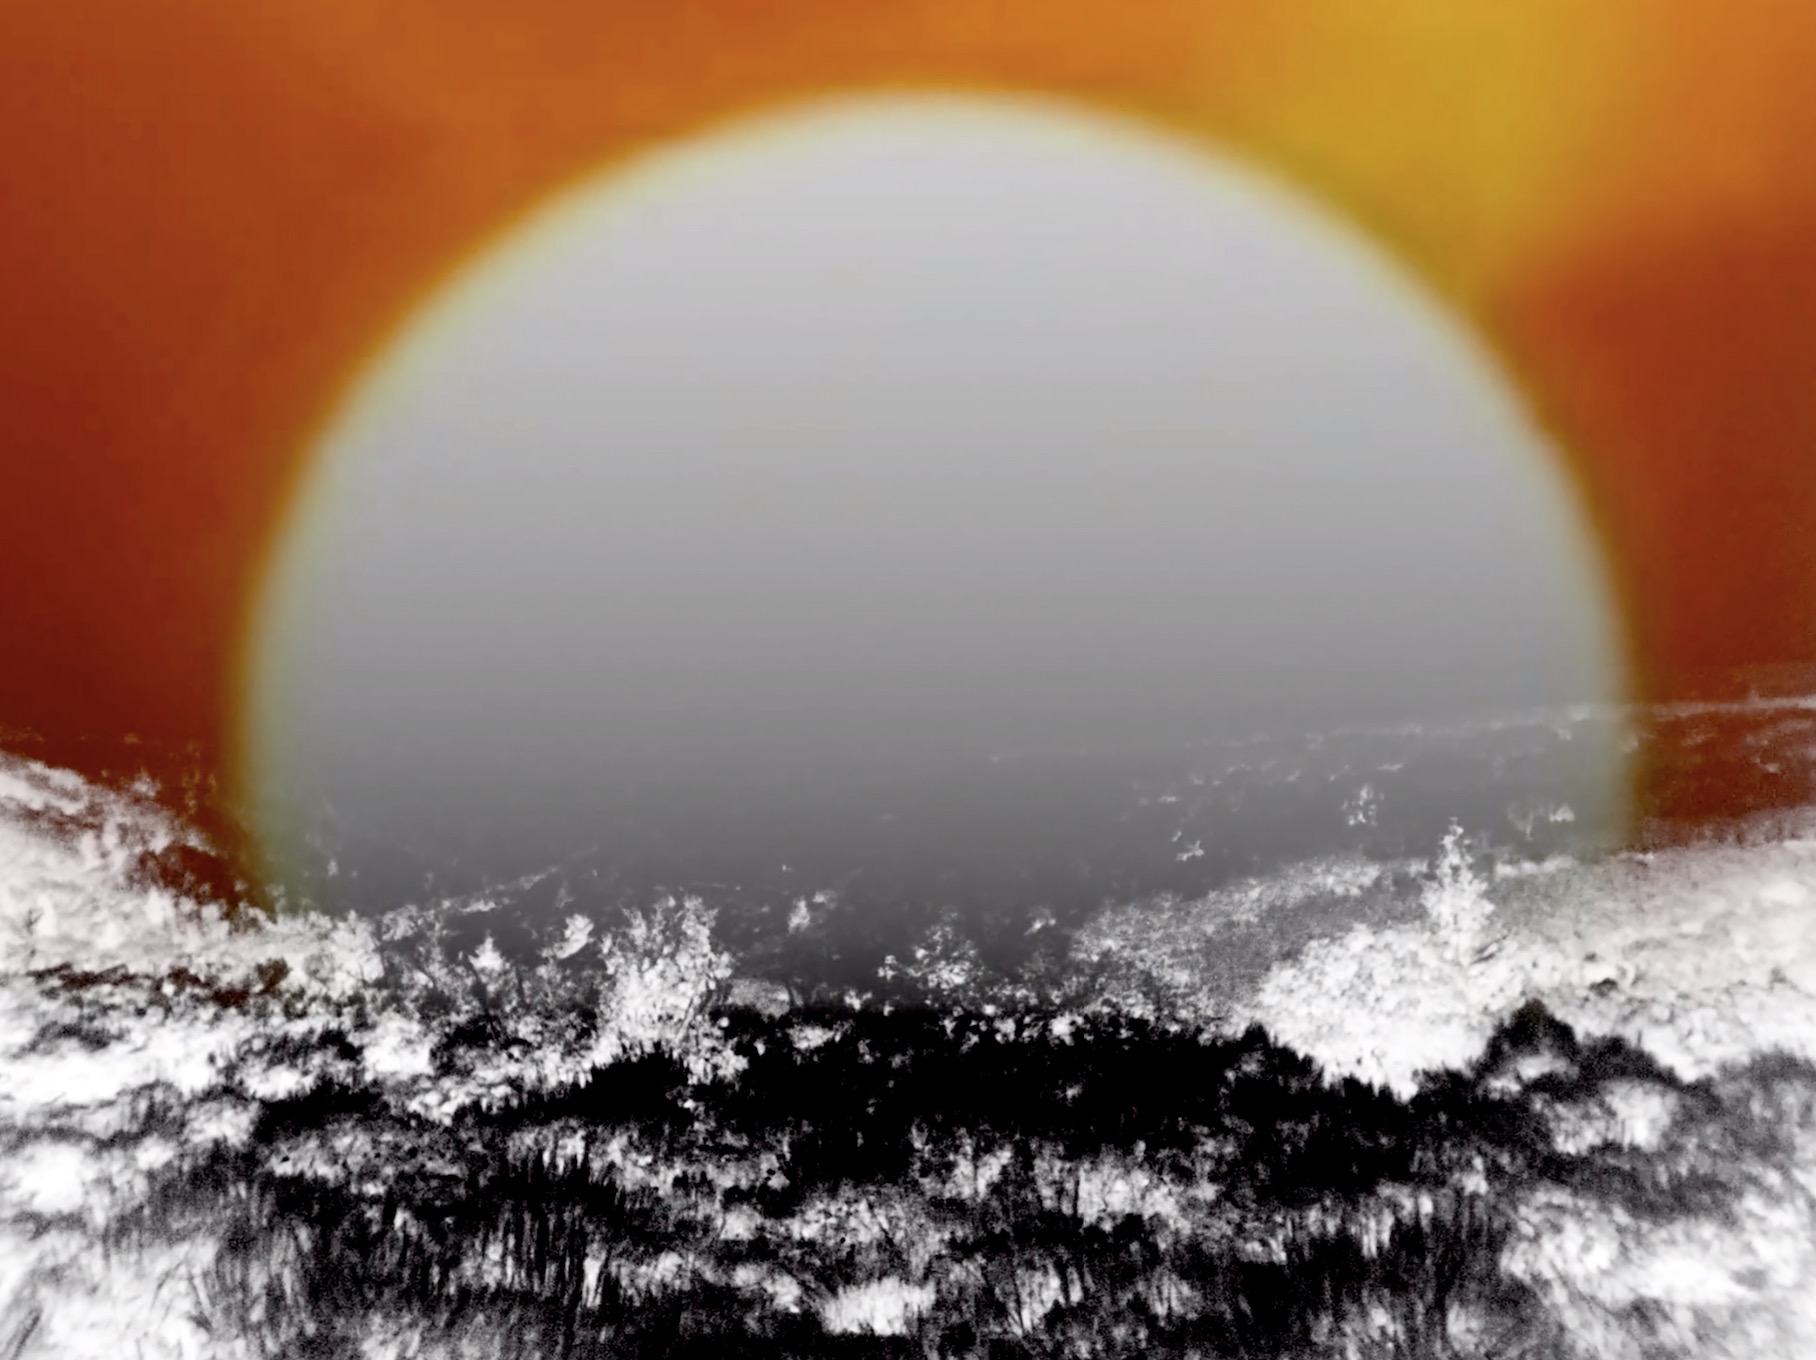 A still from Jason Livingston's film Ancient Sunshine. A white round sun fills the image. On the top and middle around it are yellow, orange, and red fields, and on the bottom, are black and white textures that cut off the bottom of the sun.